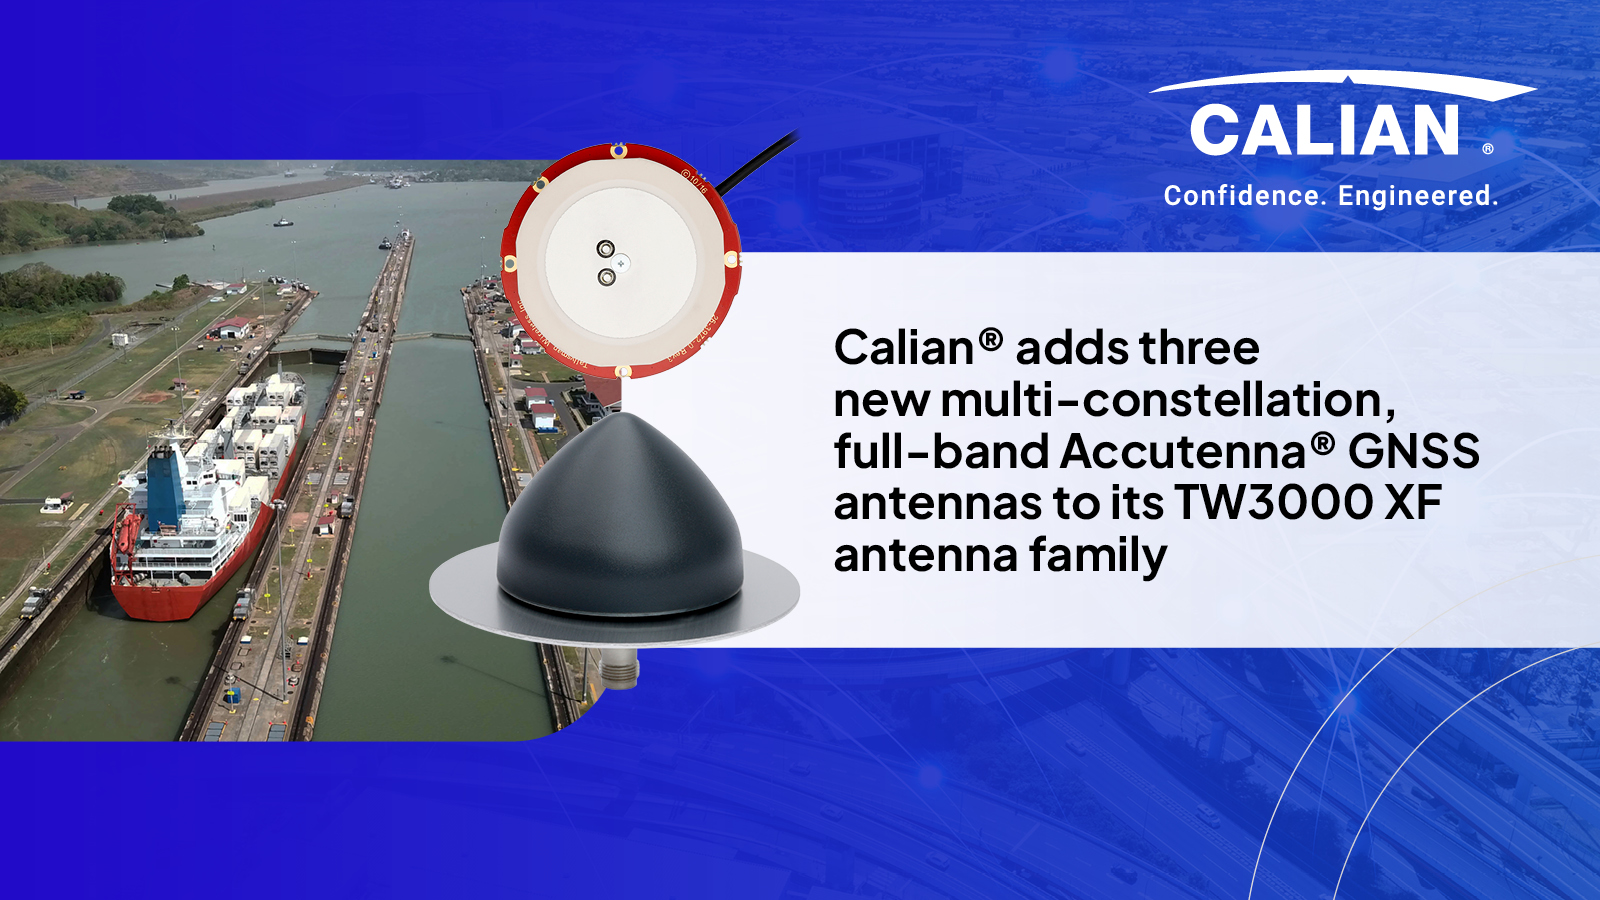 Calian adds three new multi-constellation, full-band Accutenna® GNSS antennas to its TW3000 XF antenna family 